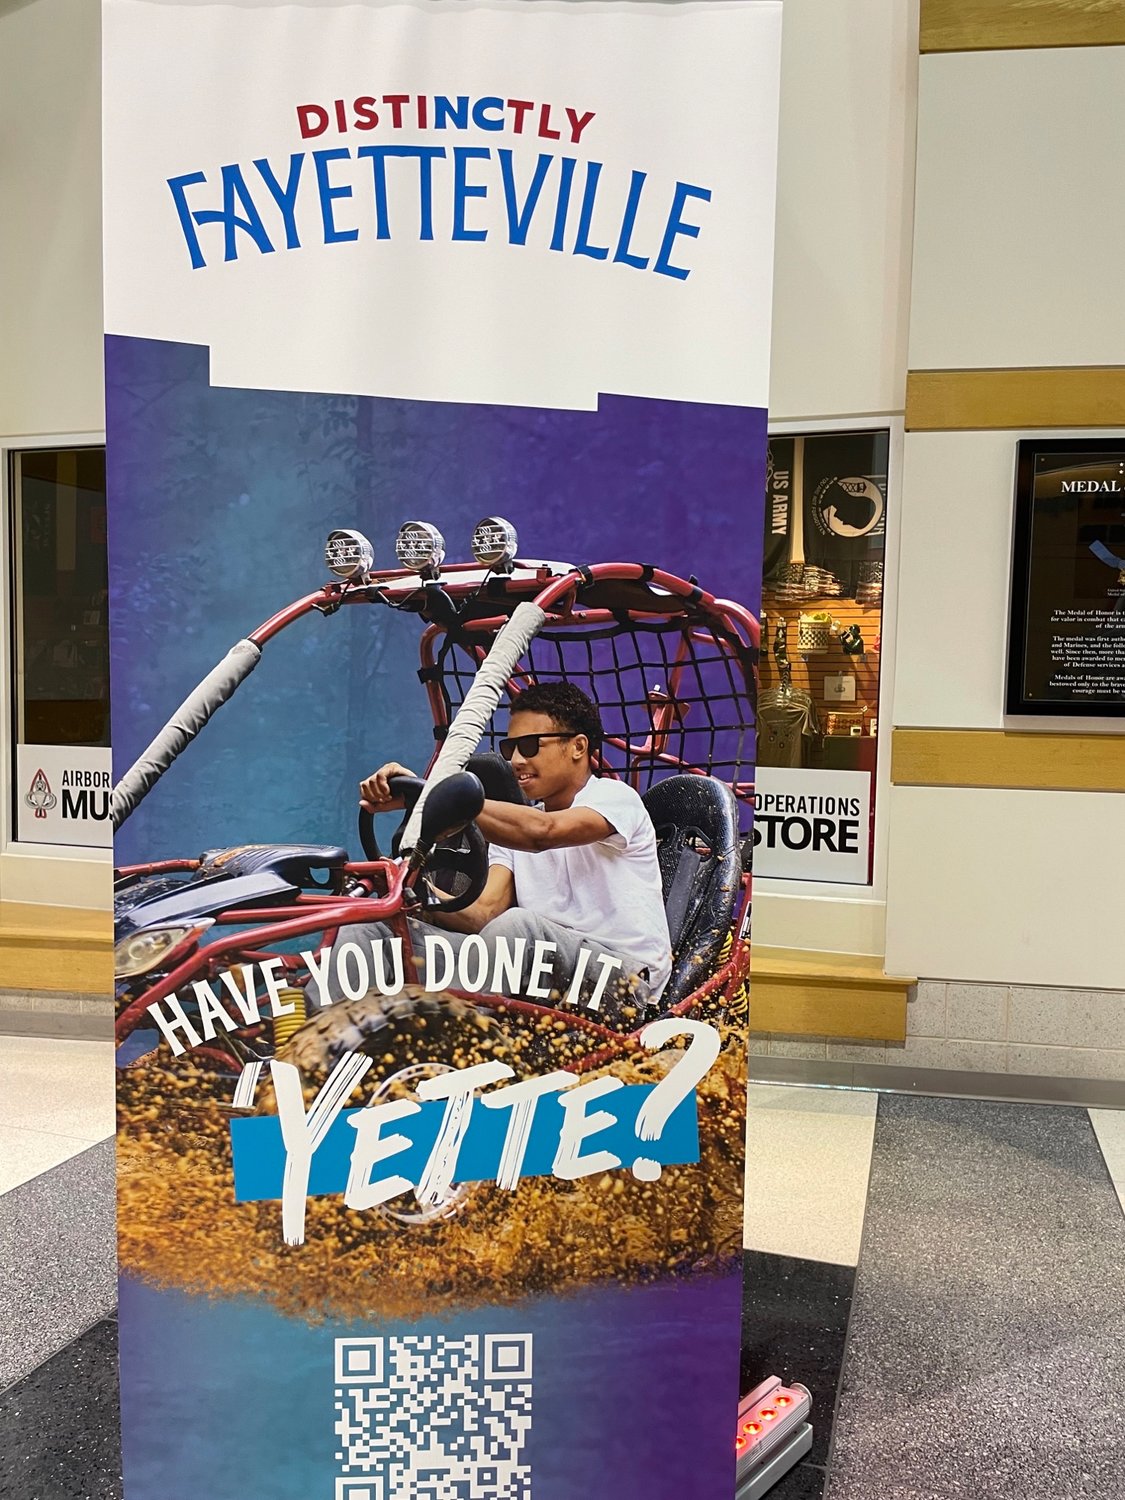 DistiNCtly Fayetteville is the new name and brand identity for the Fayetteville Area Convention and Visitors Bureau.